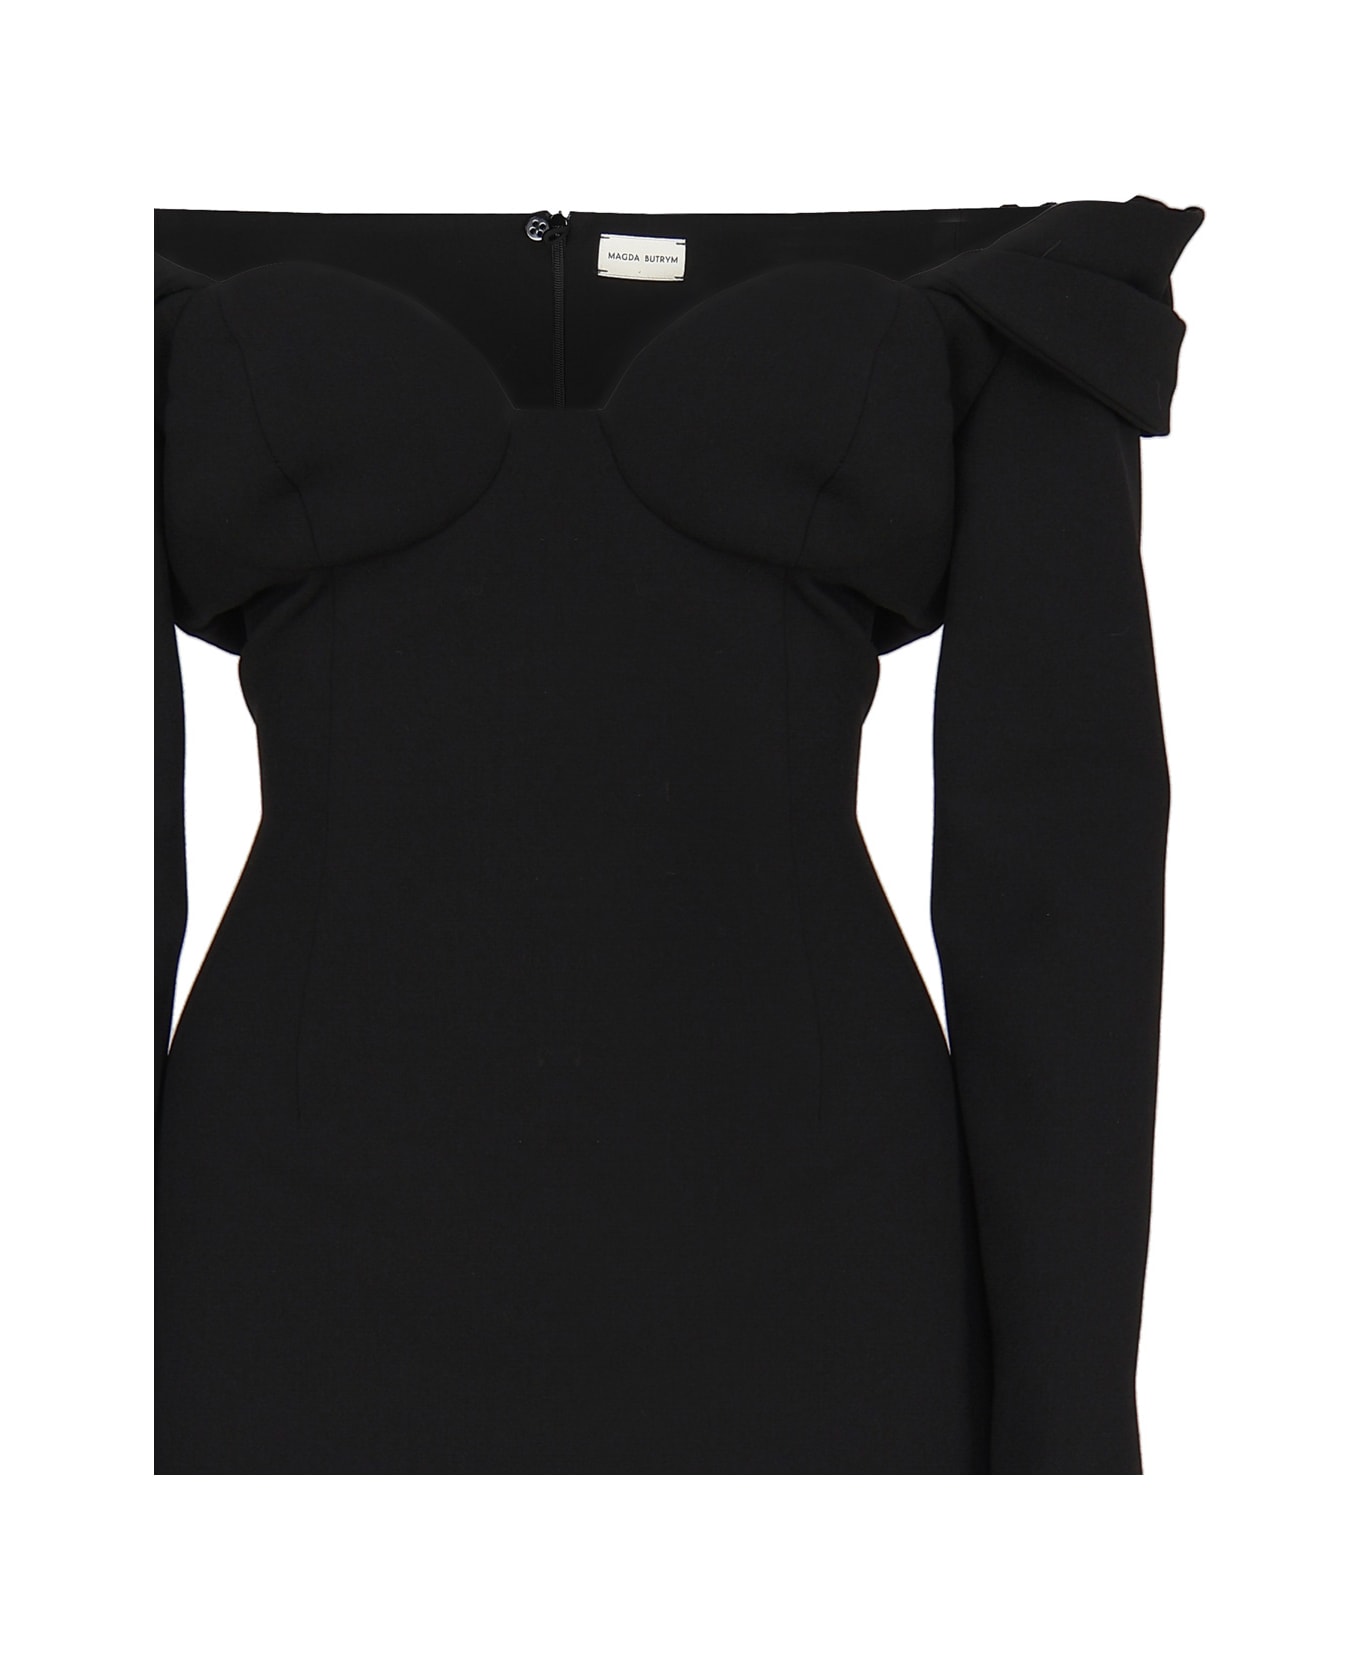 Magda Butrym Black Mini Dress With Bustier And Bare Shoulders - Black